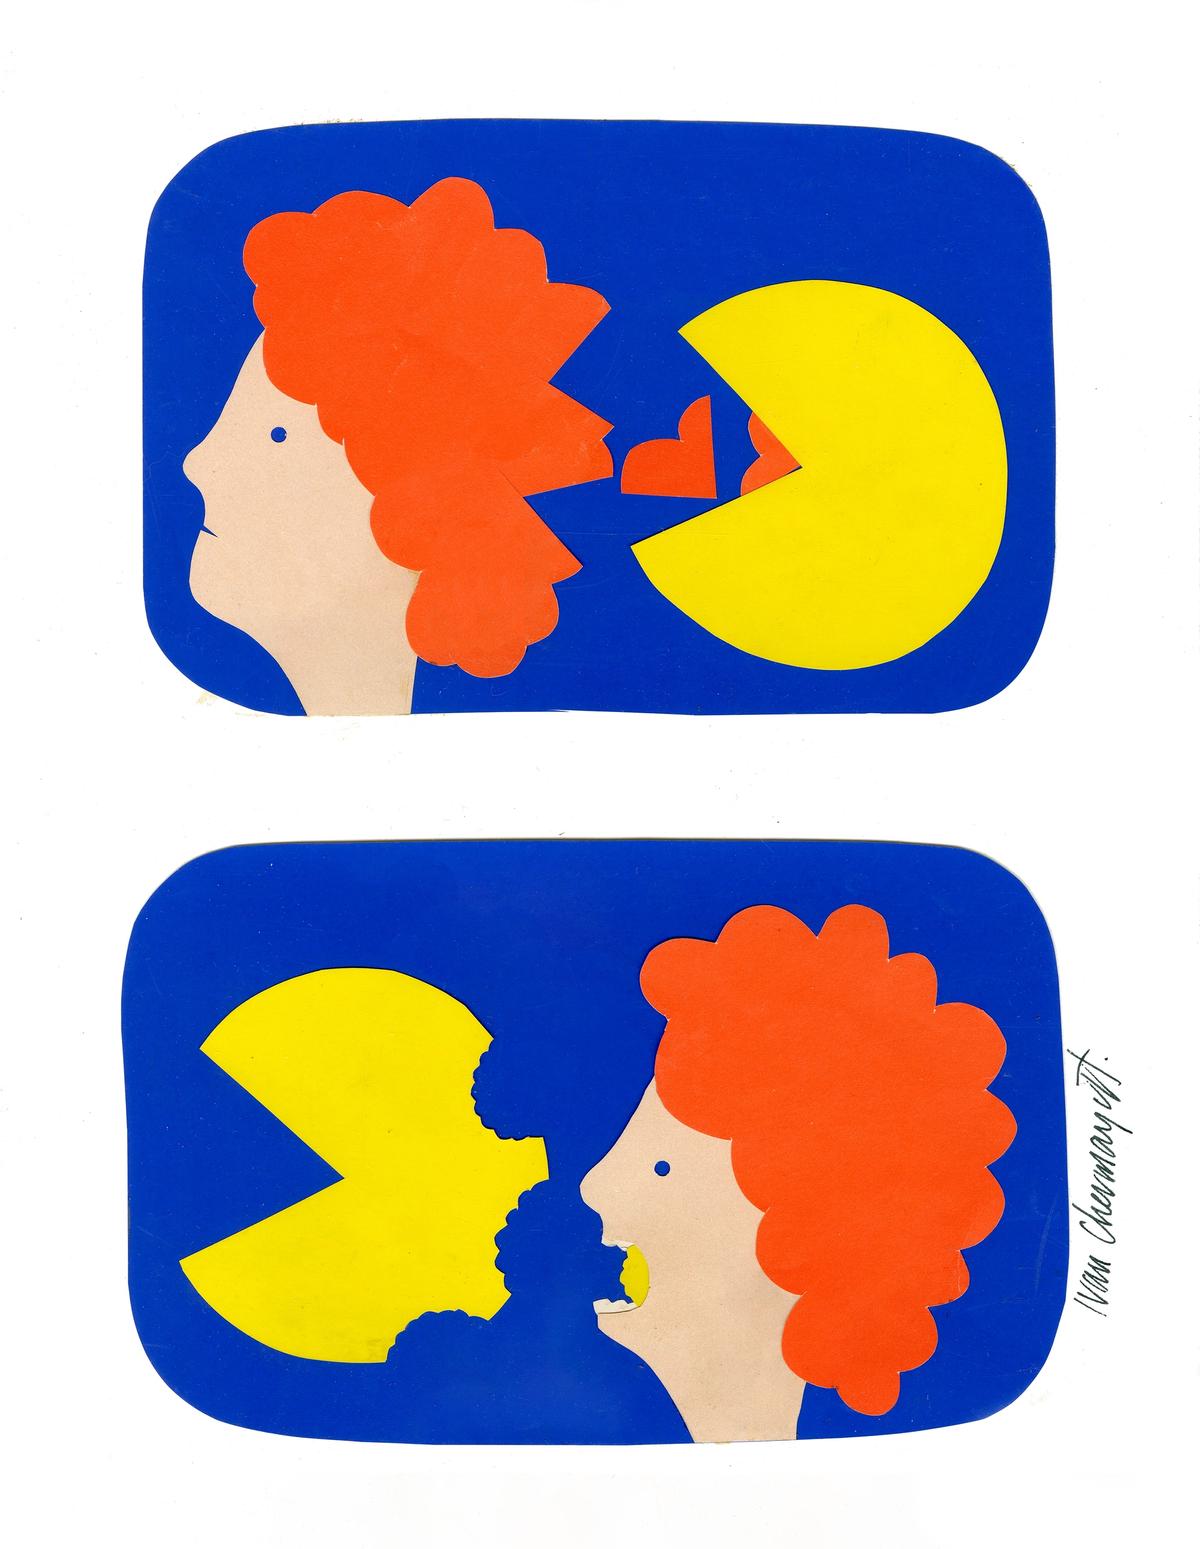 Original Pac Man art for TV Guide, Ivan Chermayeff’s deceptively simple collage was used to produce a silly and witty illustration School of Visual Arts, Milton Glaser Design Study Center and Archives